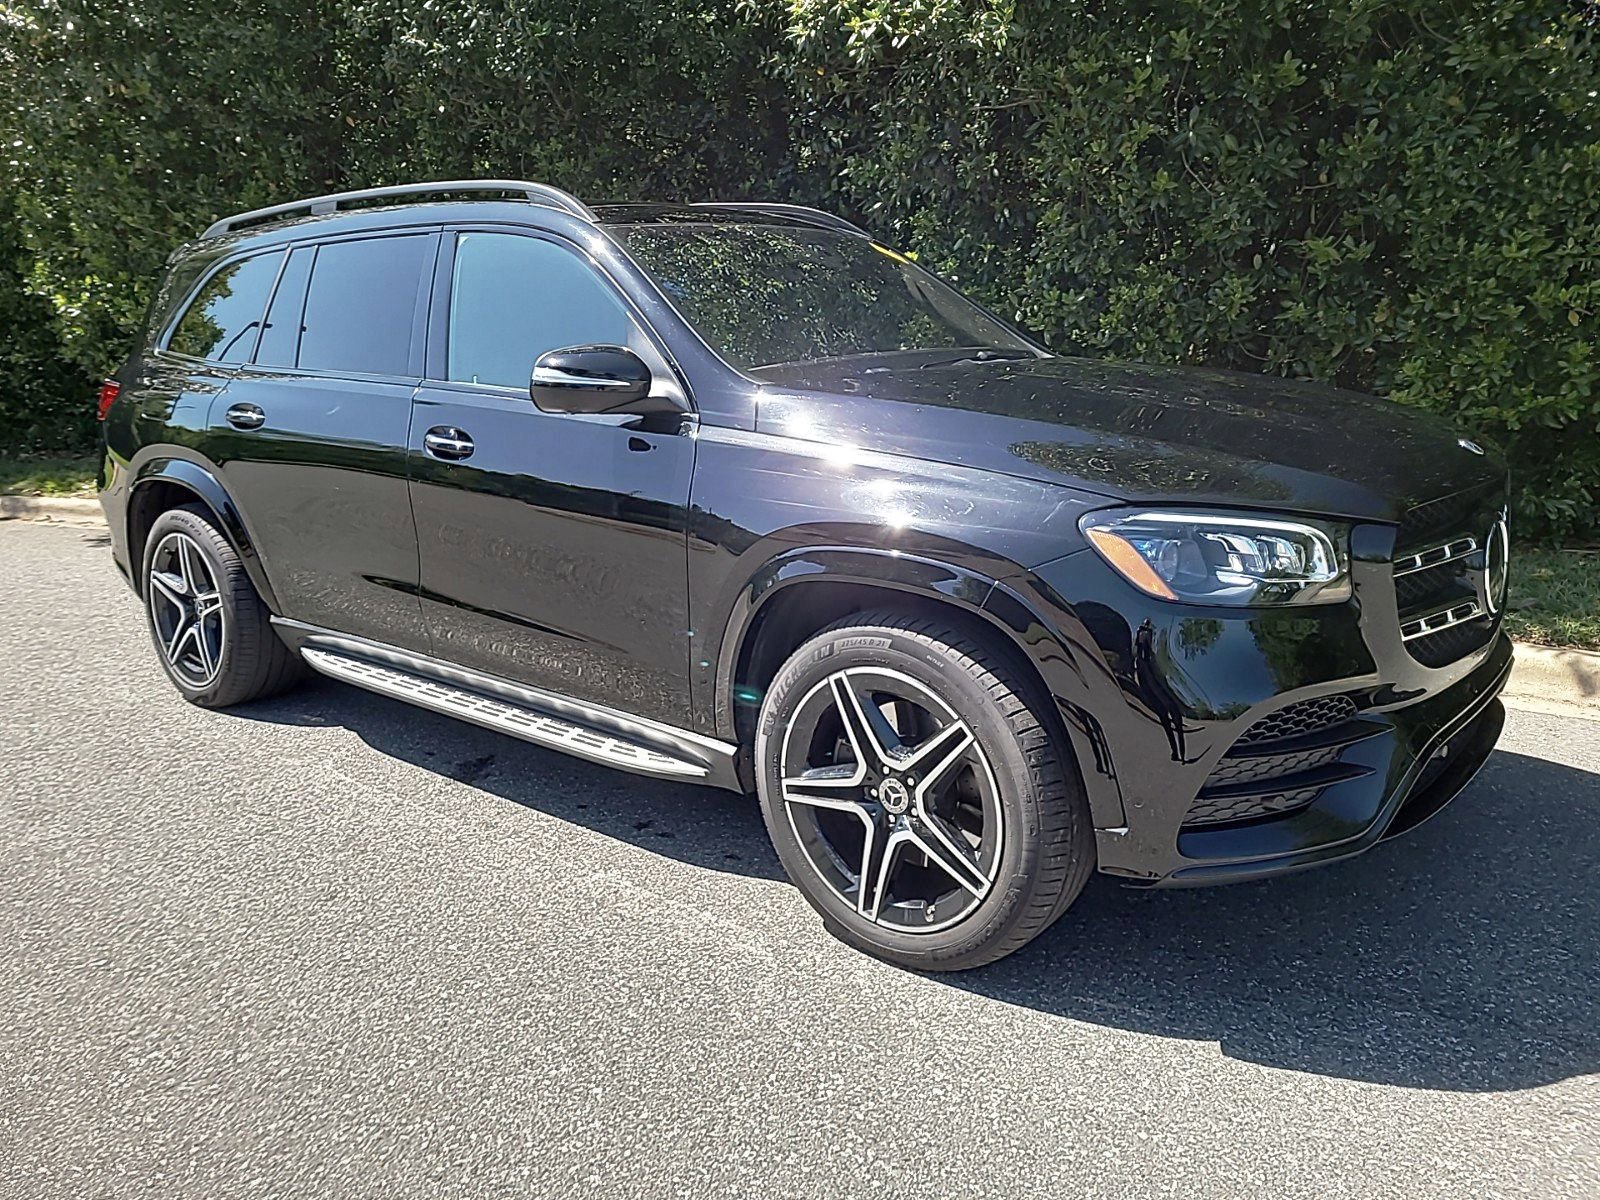 Pre-Owned 2020 Mercedes-Benz GLS 580 SUV in Cary #P6988 | Hendrick Dodge  Cary